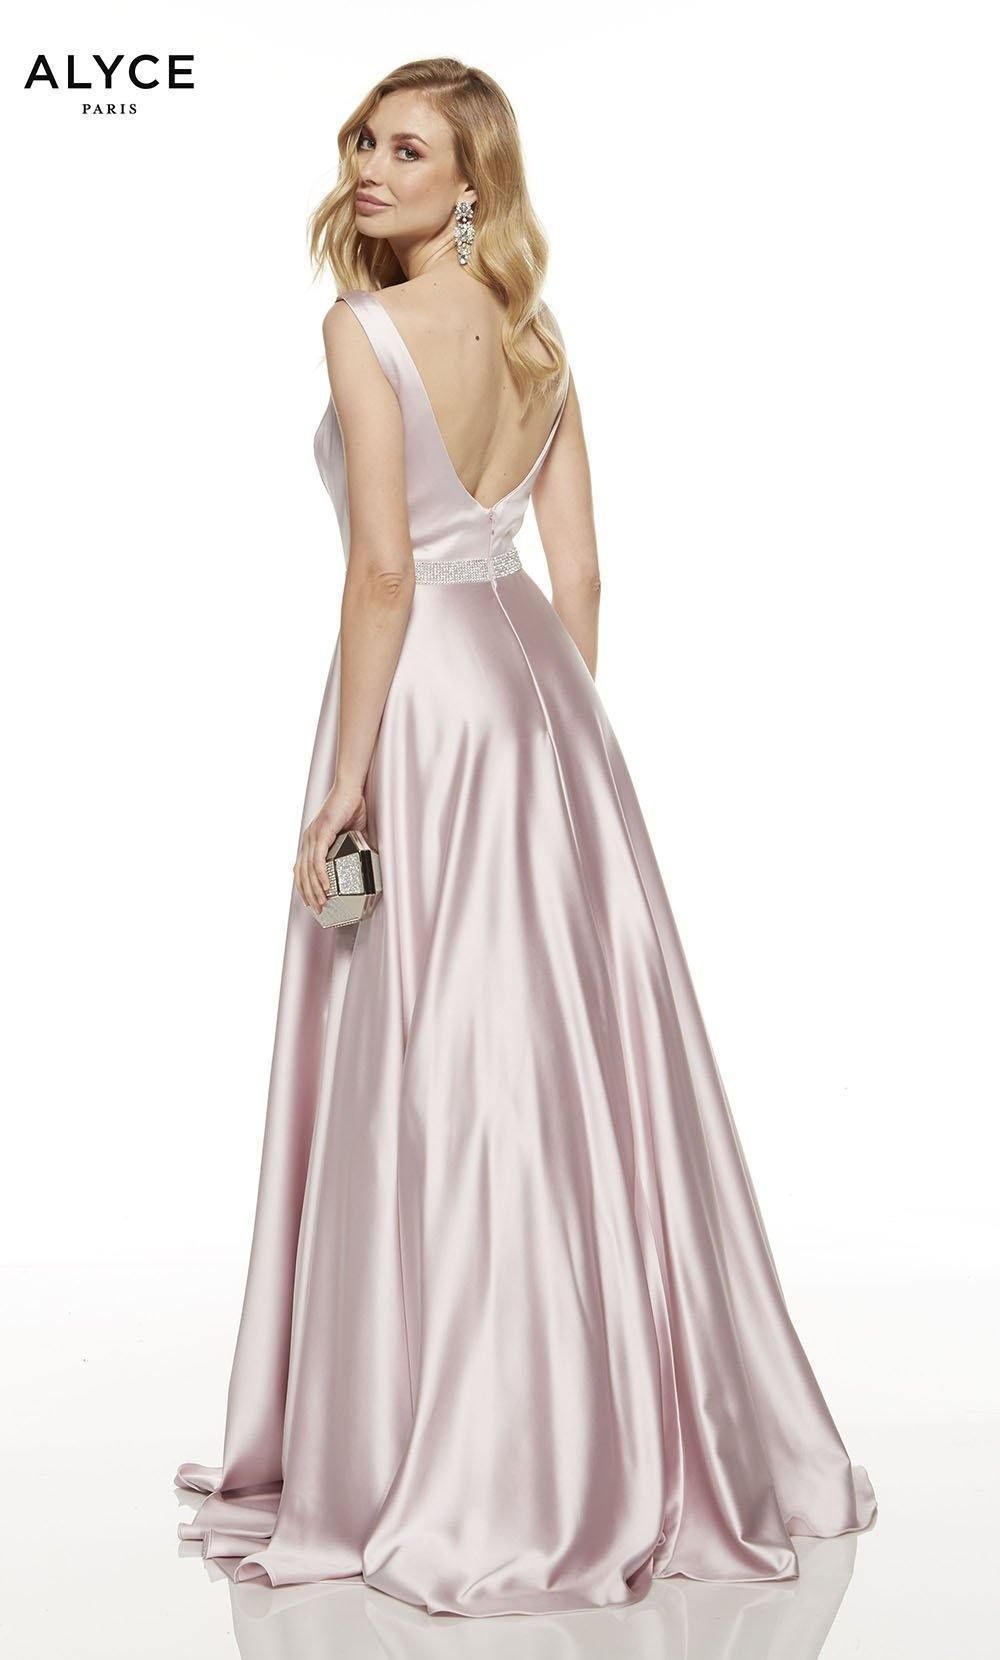 Style RHIANNA The Secret Dress Plus Size 20 Bridesmaid High Neck Satin Light Pink Ball Gown on Queenly